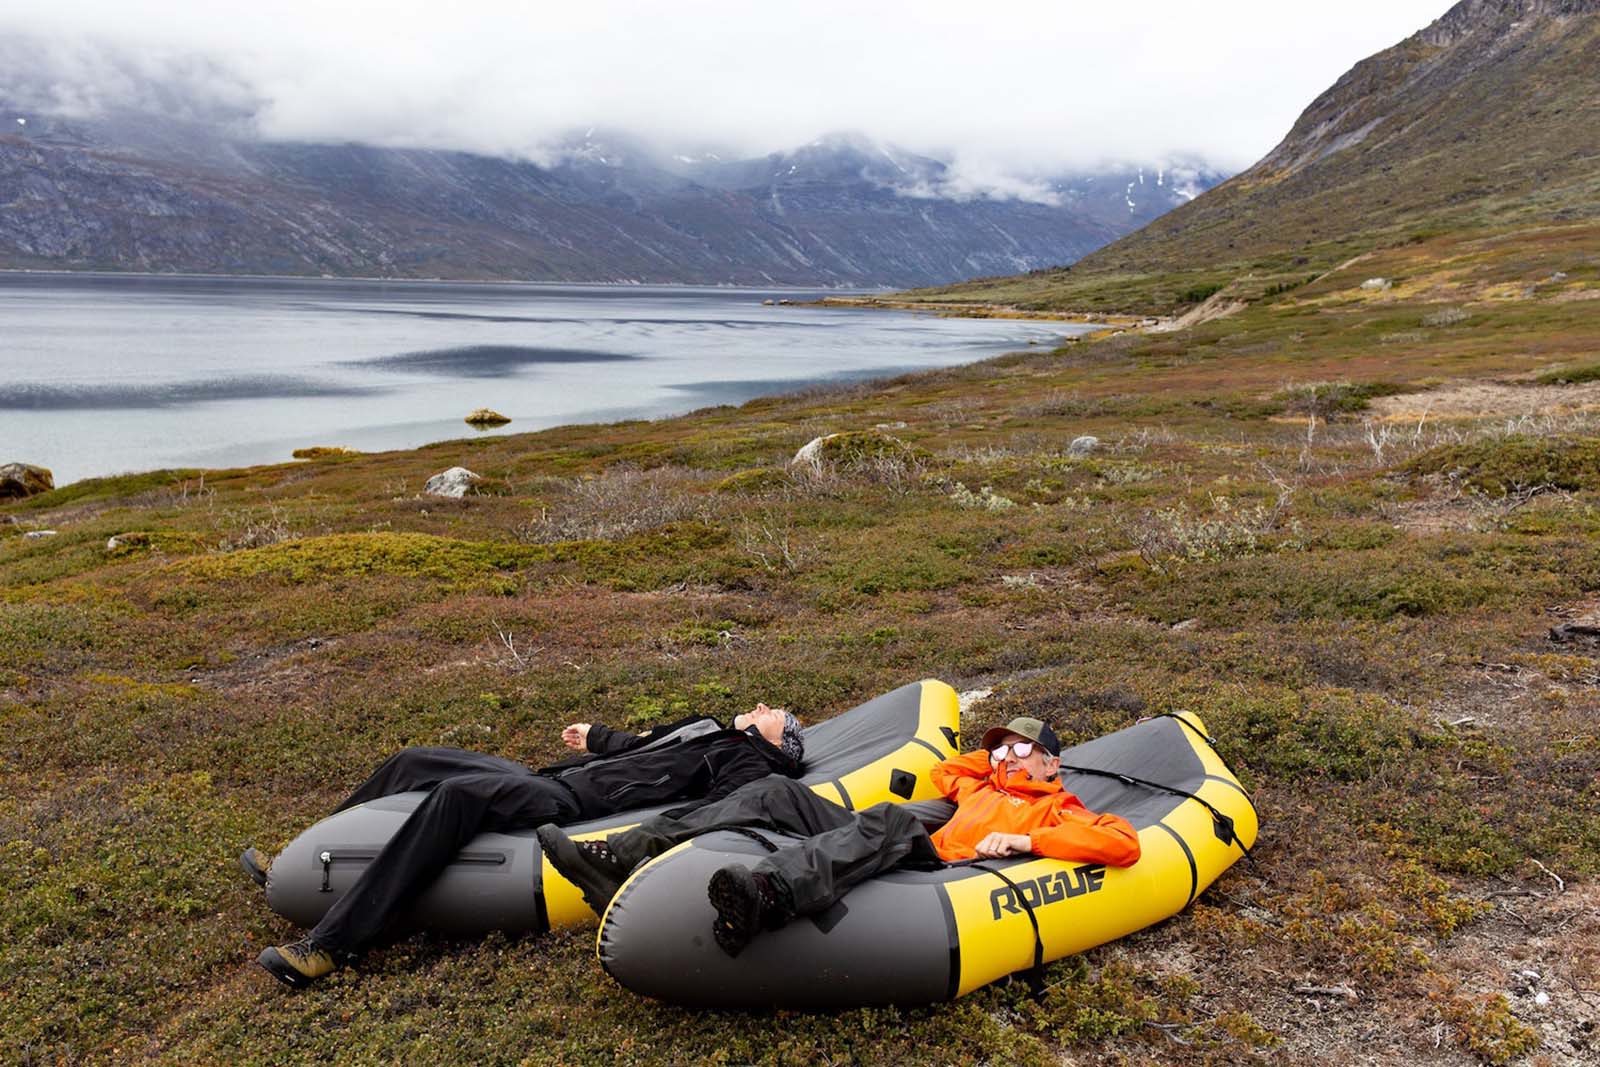 Taking a rest on the shores of Tasermiut Fjord on our Kokopelli packrafts